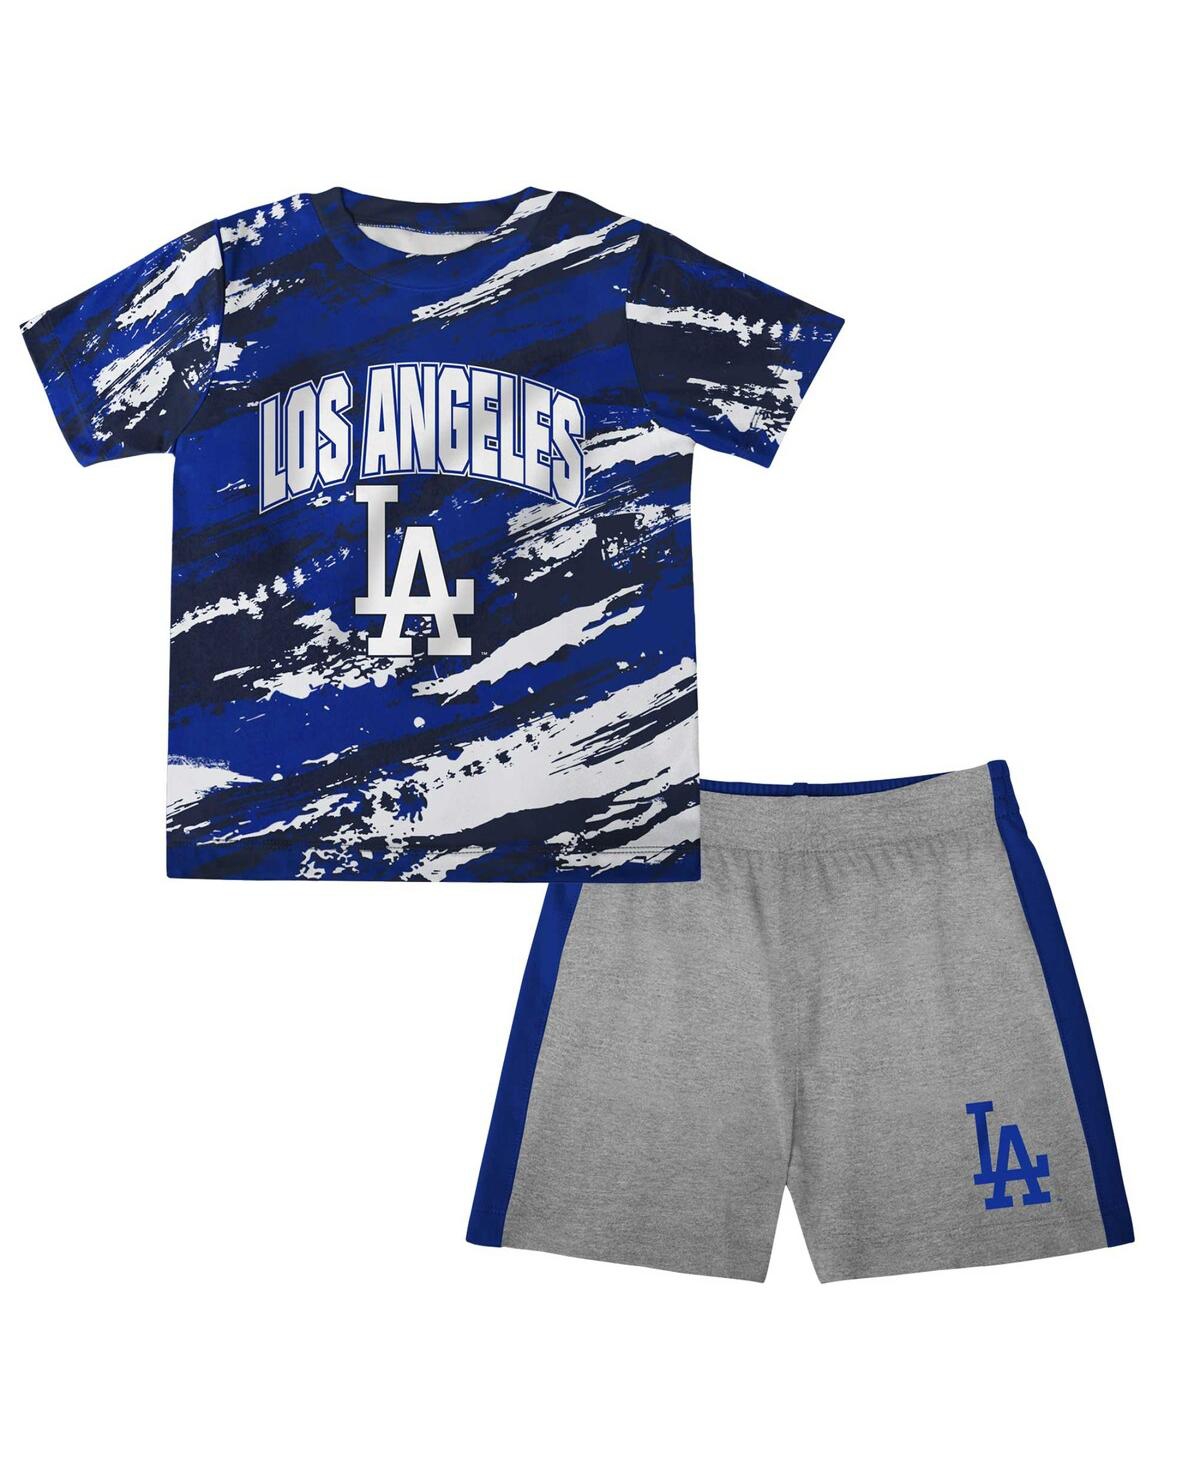 OUTERSTUFF TODDLER BOYS AND GIRLS ROYAL, GRAY LOS ANGELES DODGERS STEALING HOMEBASE 2.0 T-SHIRT AND SHORTS SET